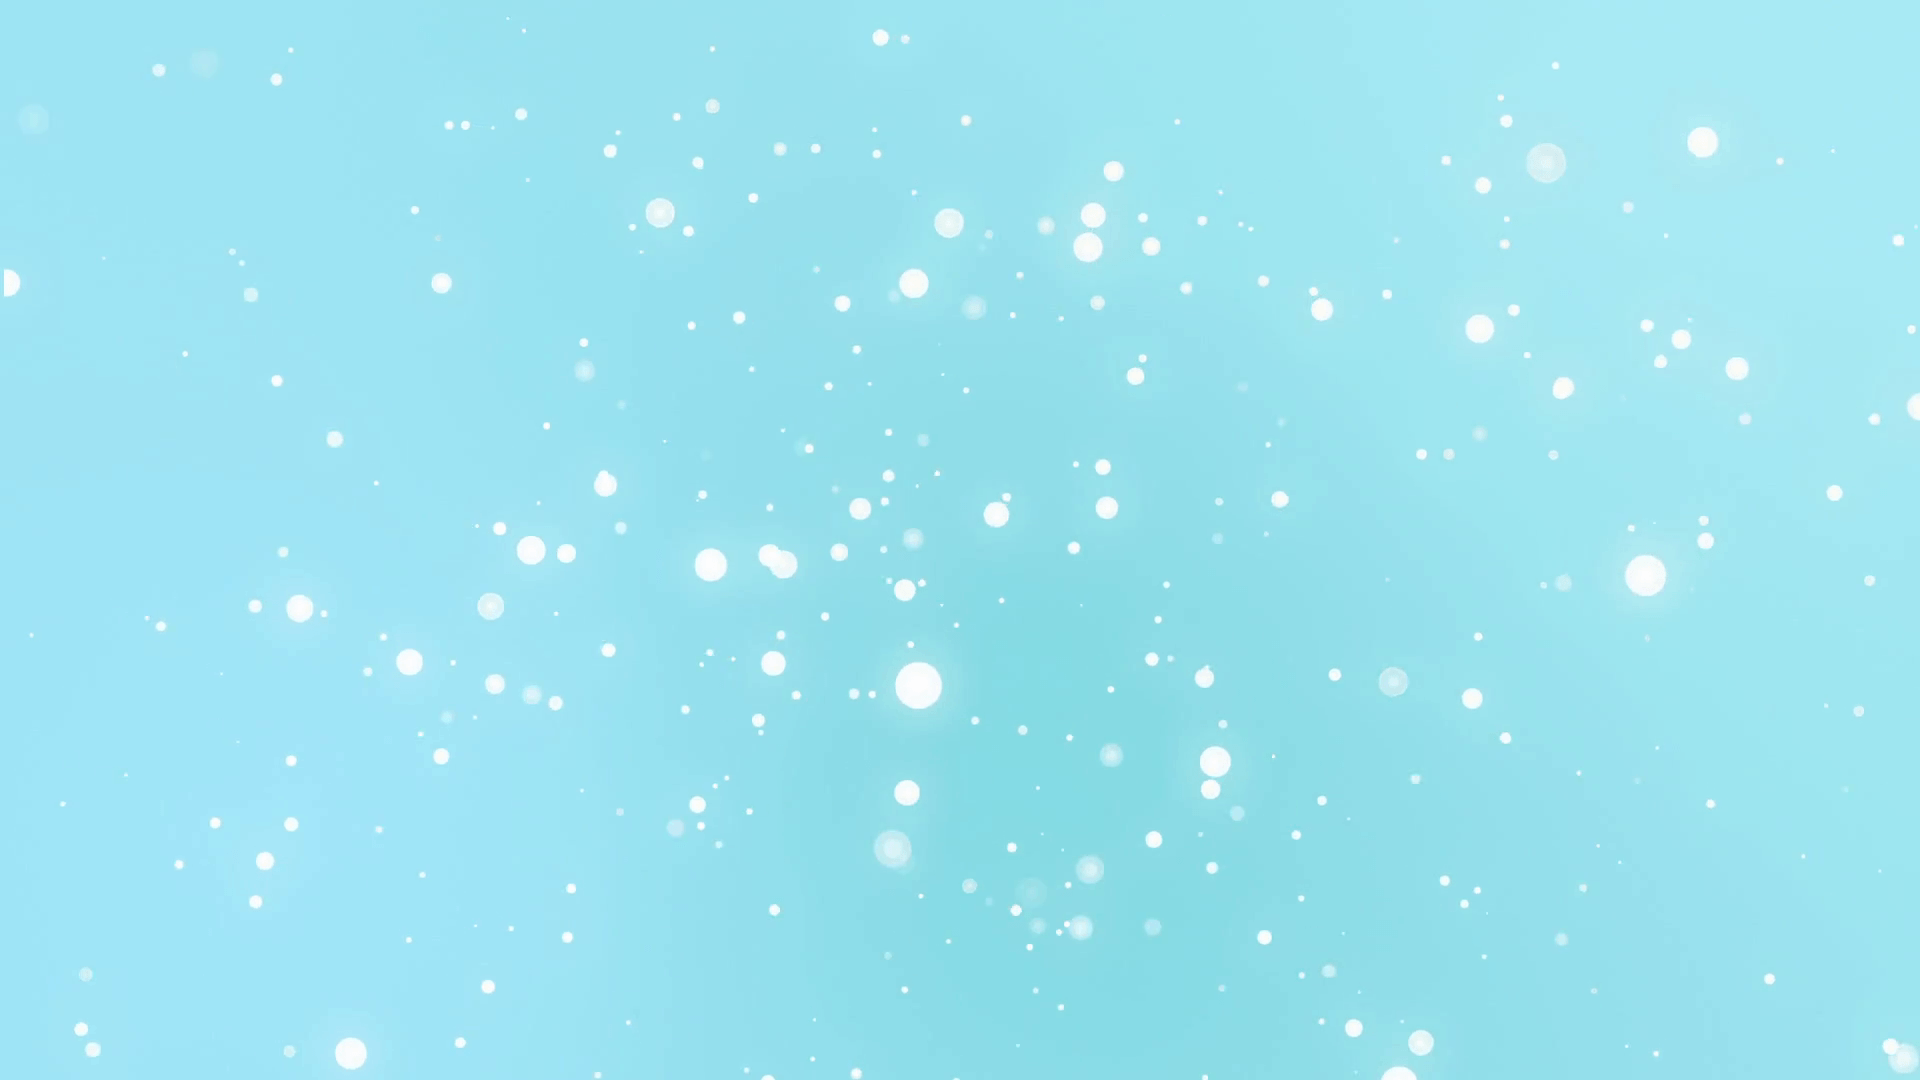 Glowing white snowflake particles falling down against a light teal